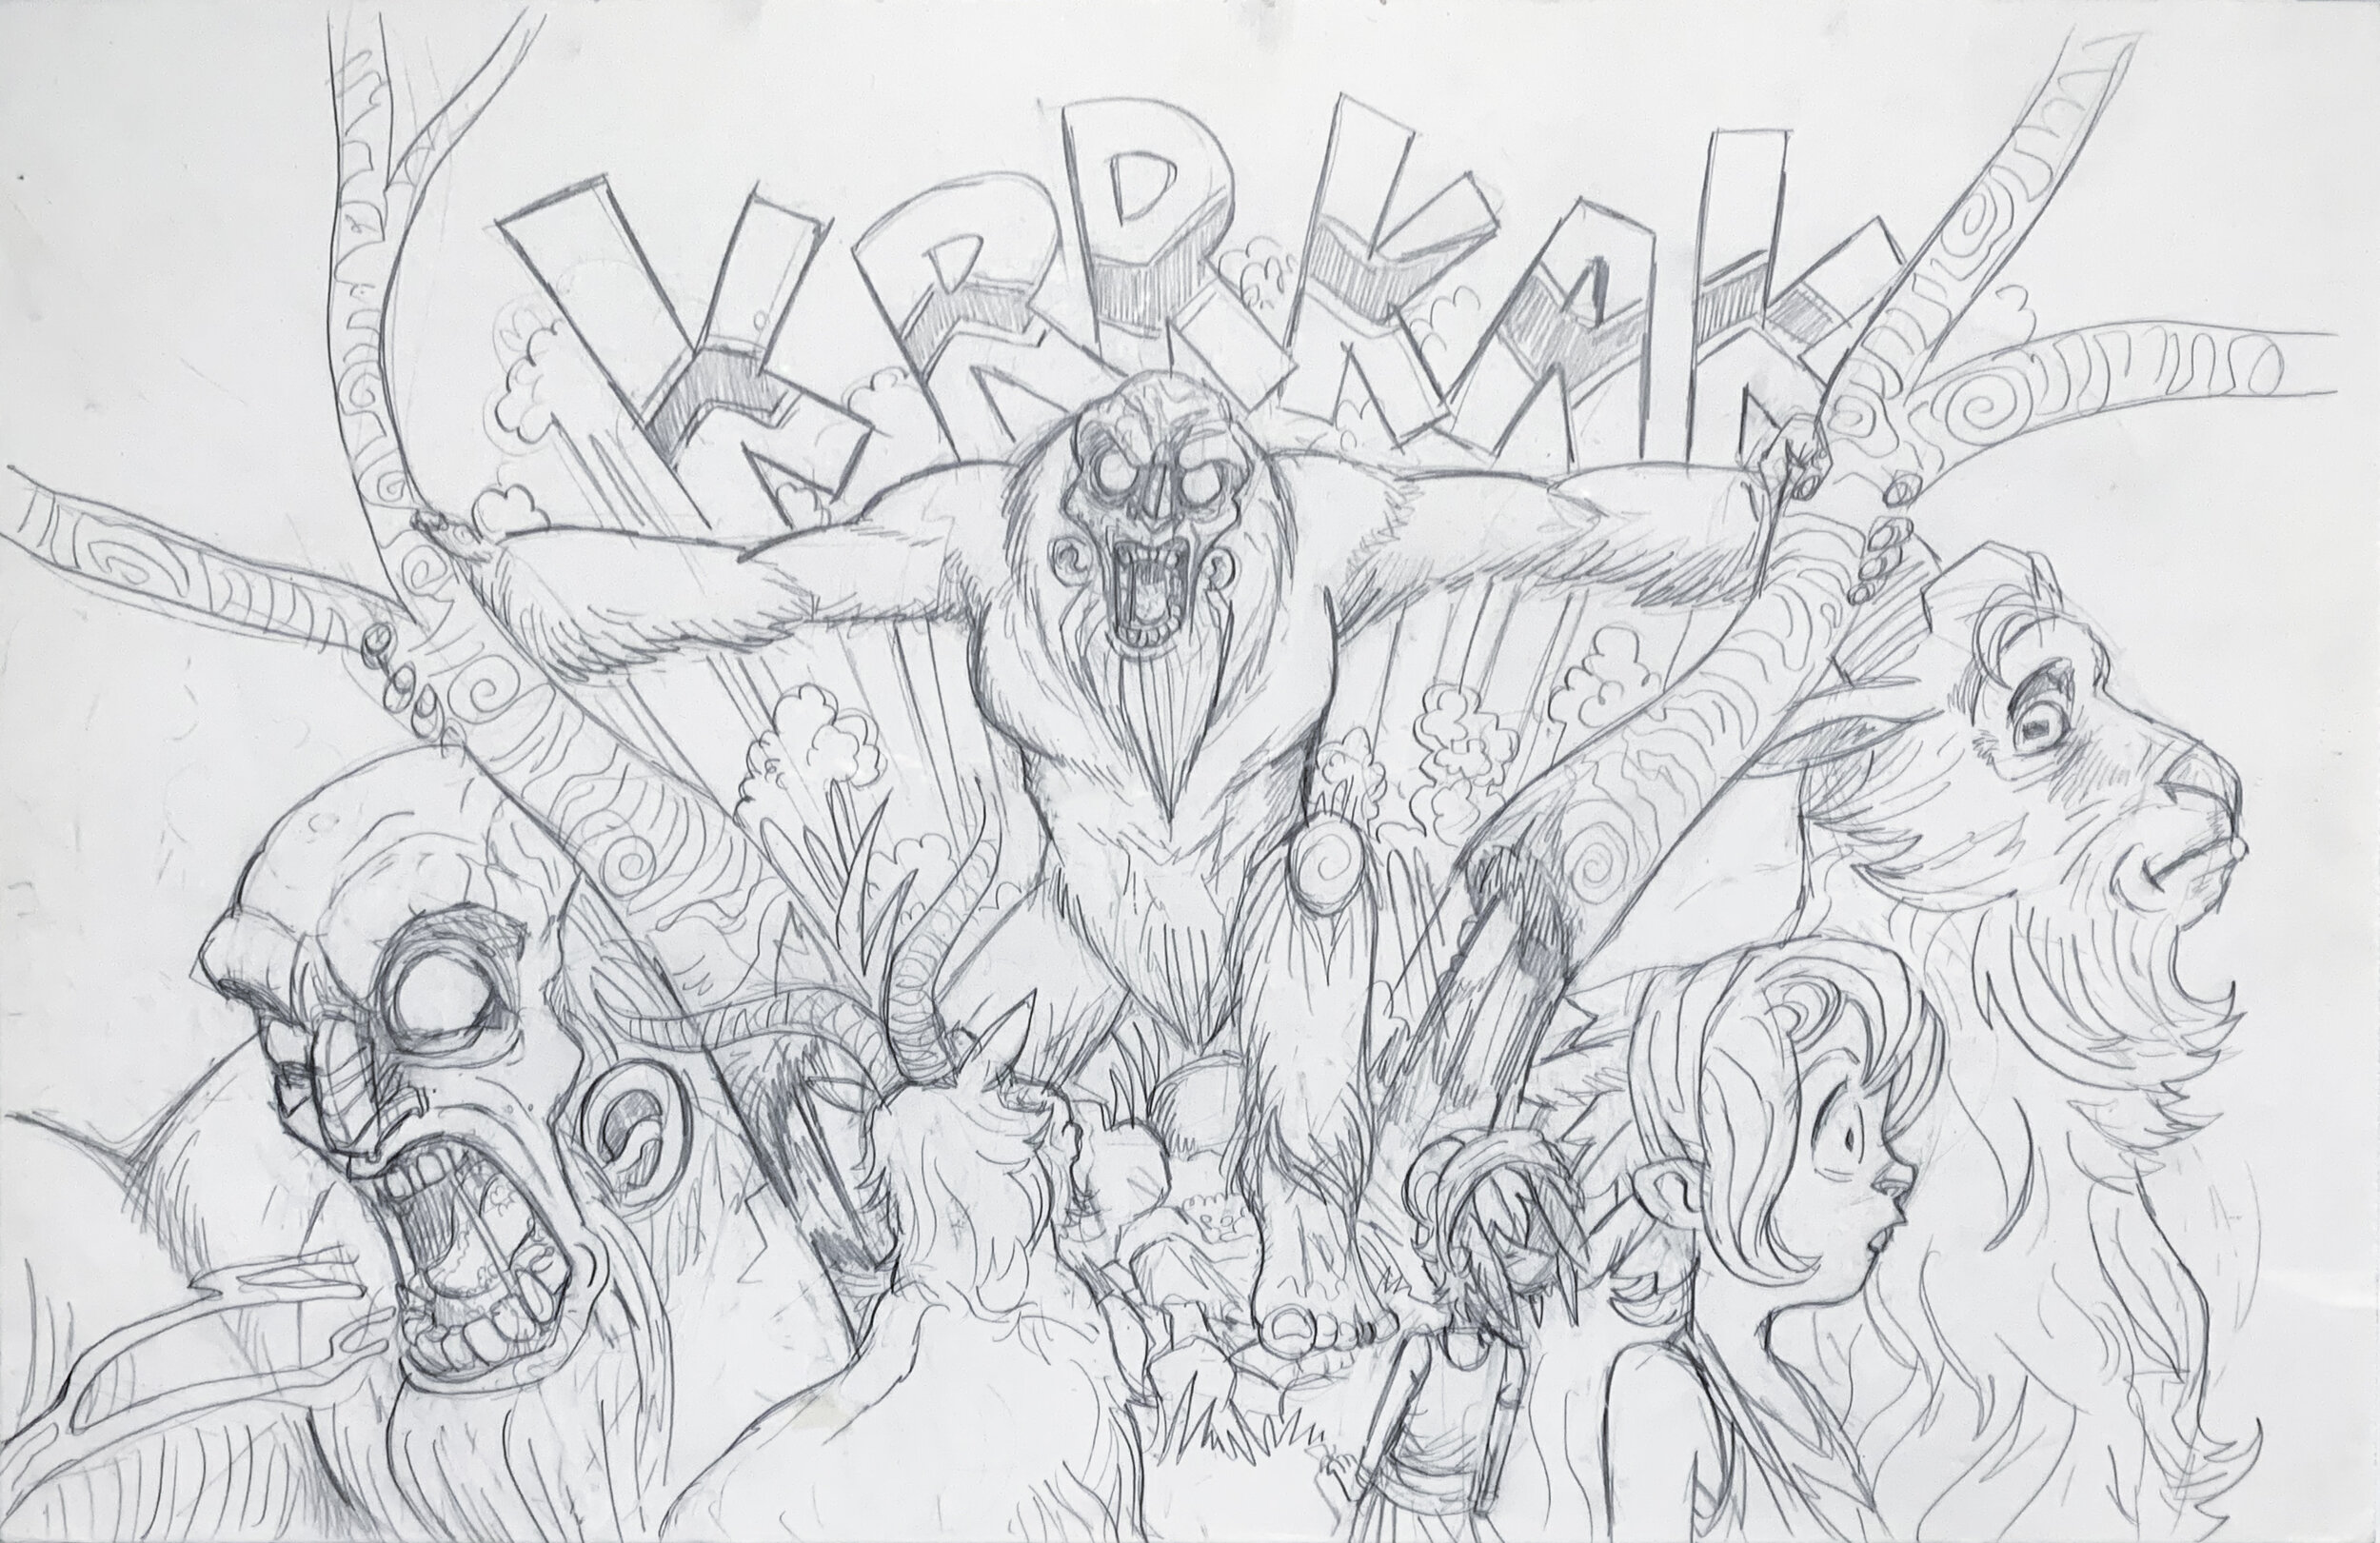   Gustav Carlson    Eve of the Ozarks: The Hairy, Part 4 , 2013  pencil 